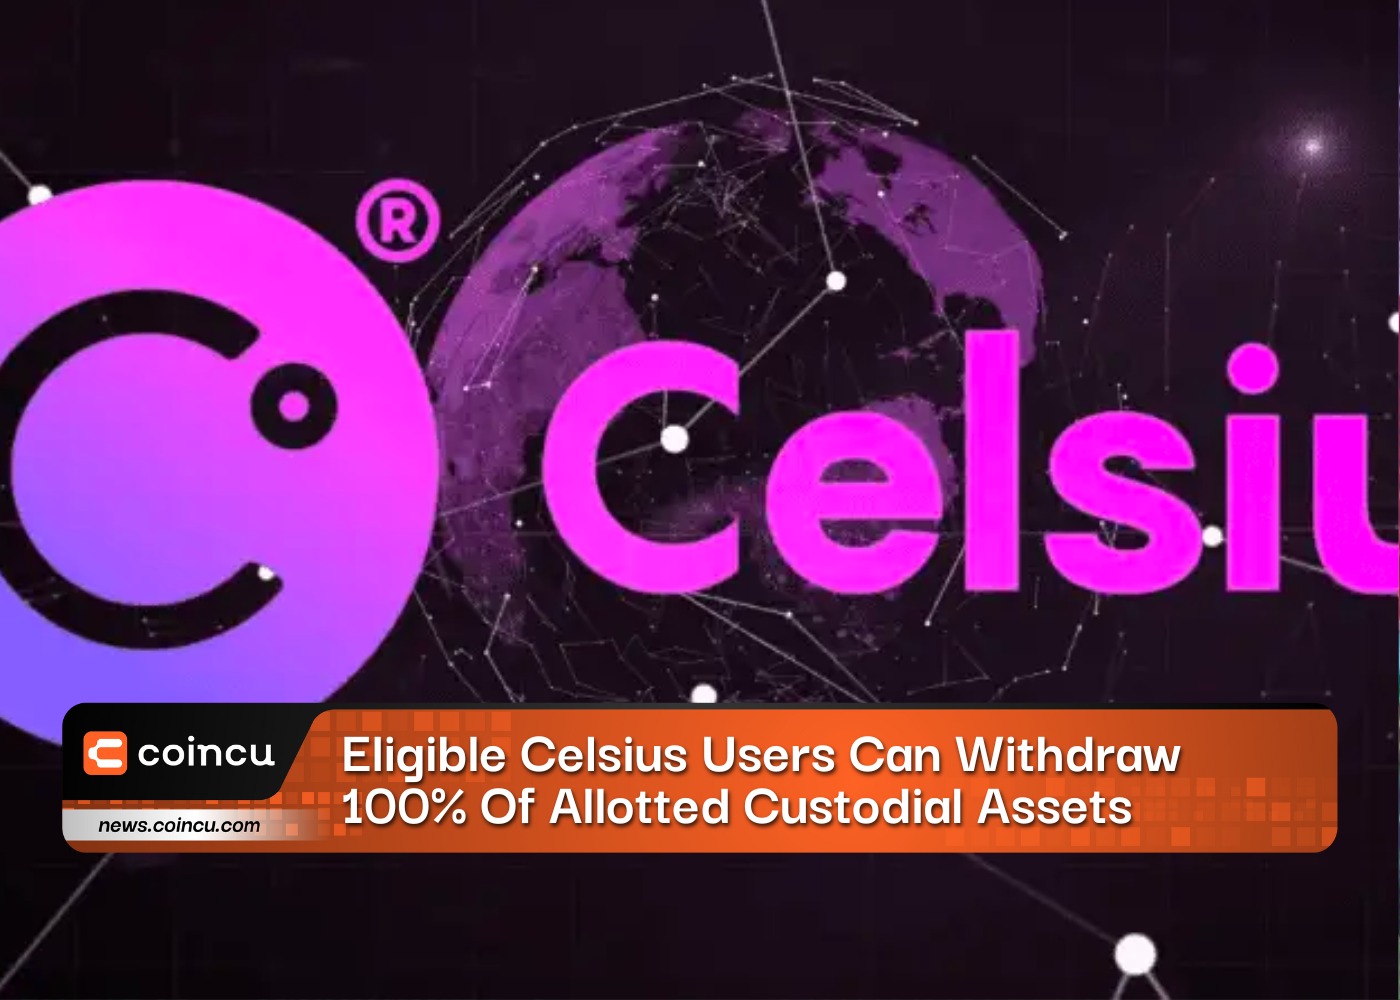 Eligible Celsius Users Can Withdraw 100% Of Allotted Custodial Assets